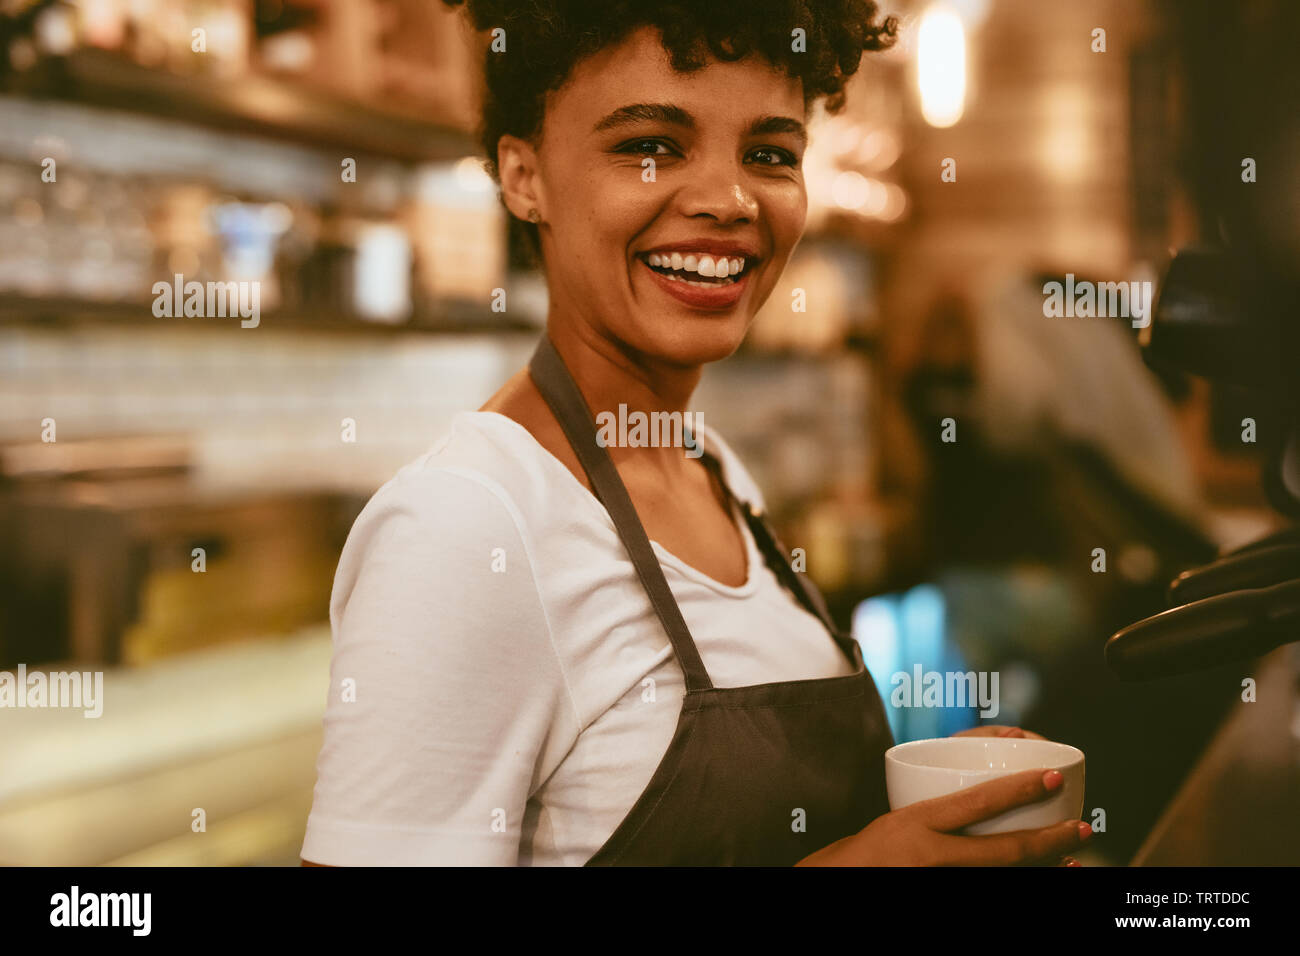 Female barista holding a cup standing by a coffee maker. Female cafe worker preparing coffee in machine. Stock Photo